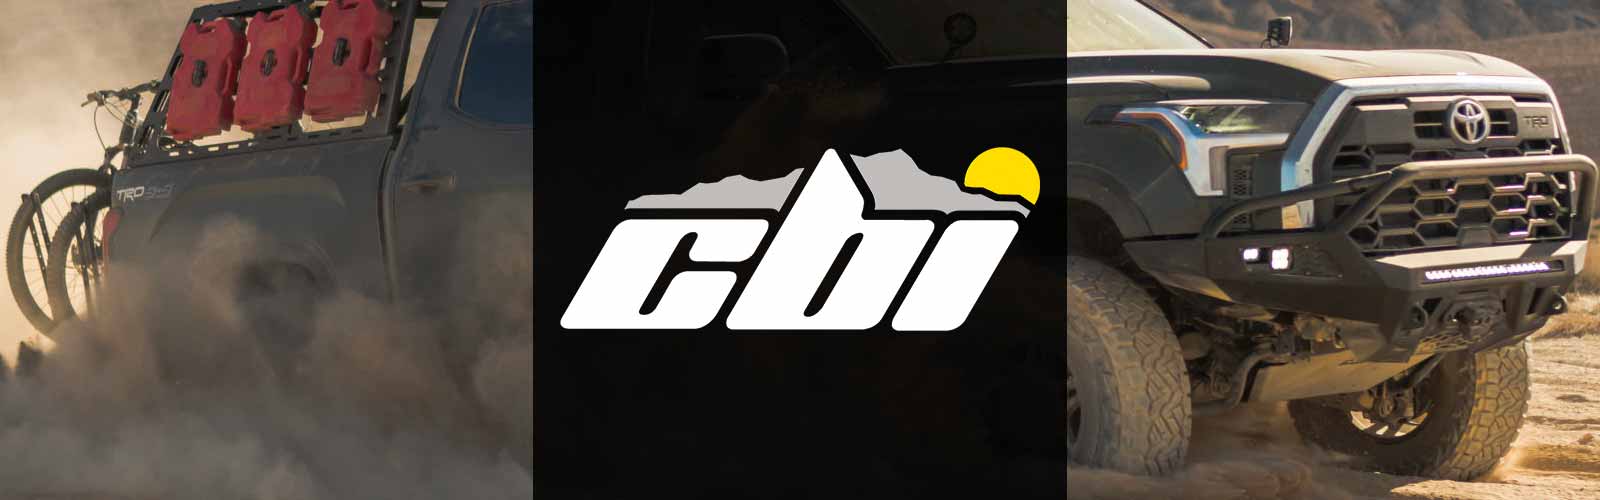 CBI Offroad Toyota Truck and SUV parts and Accessories